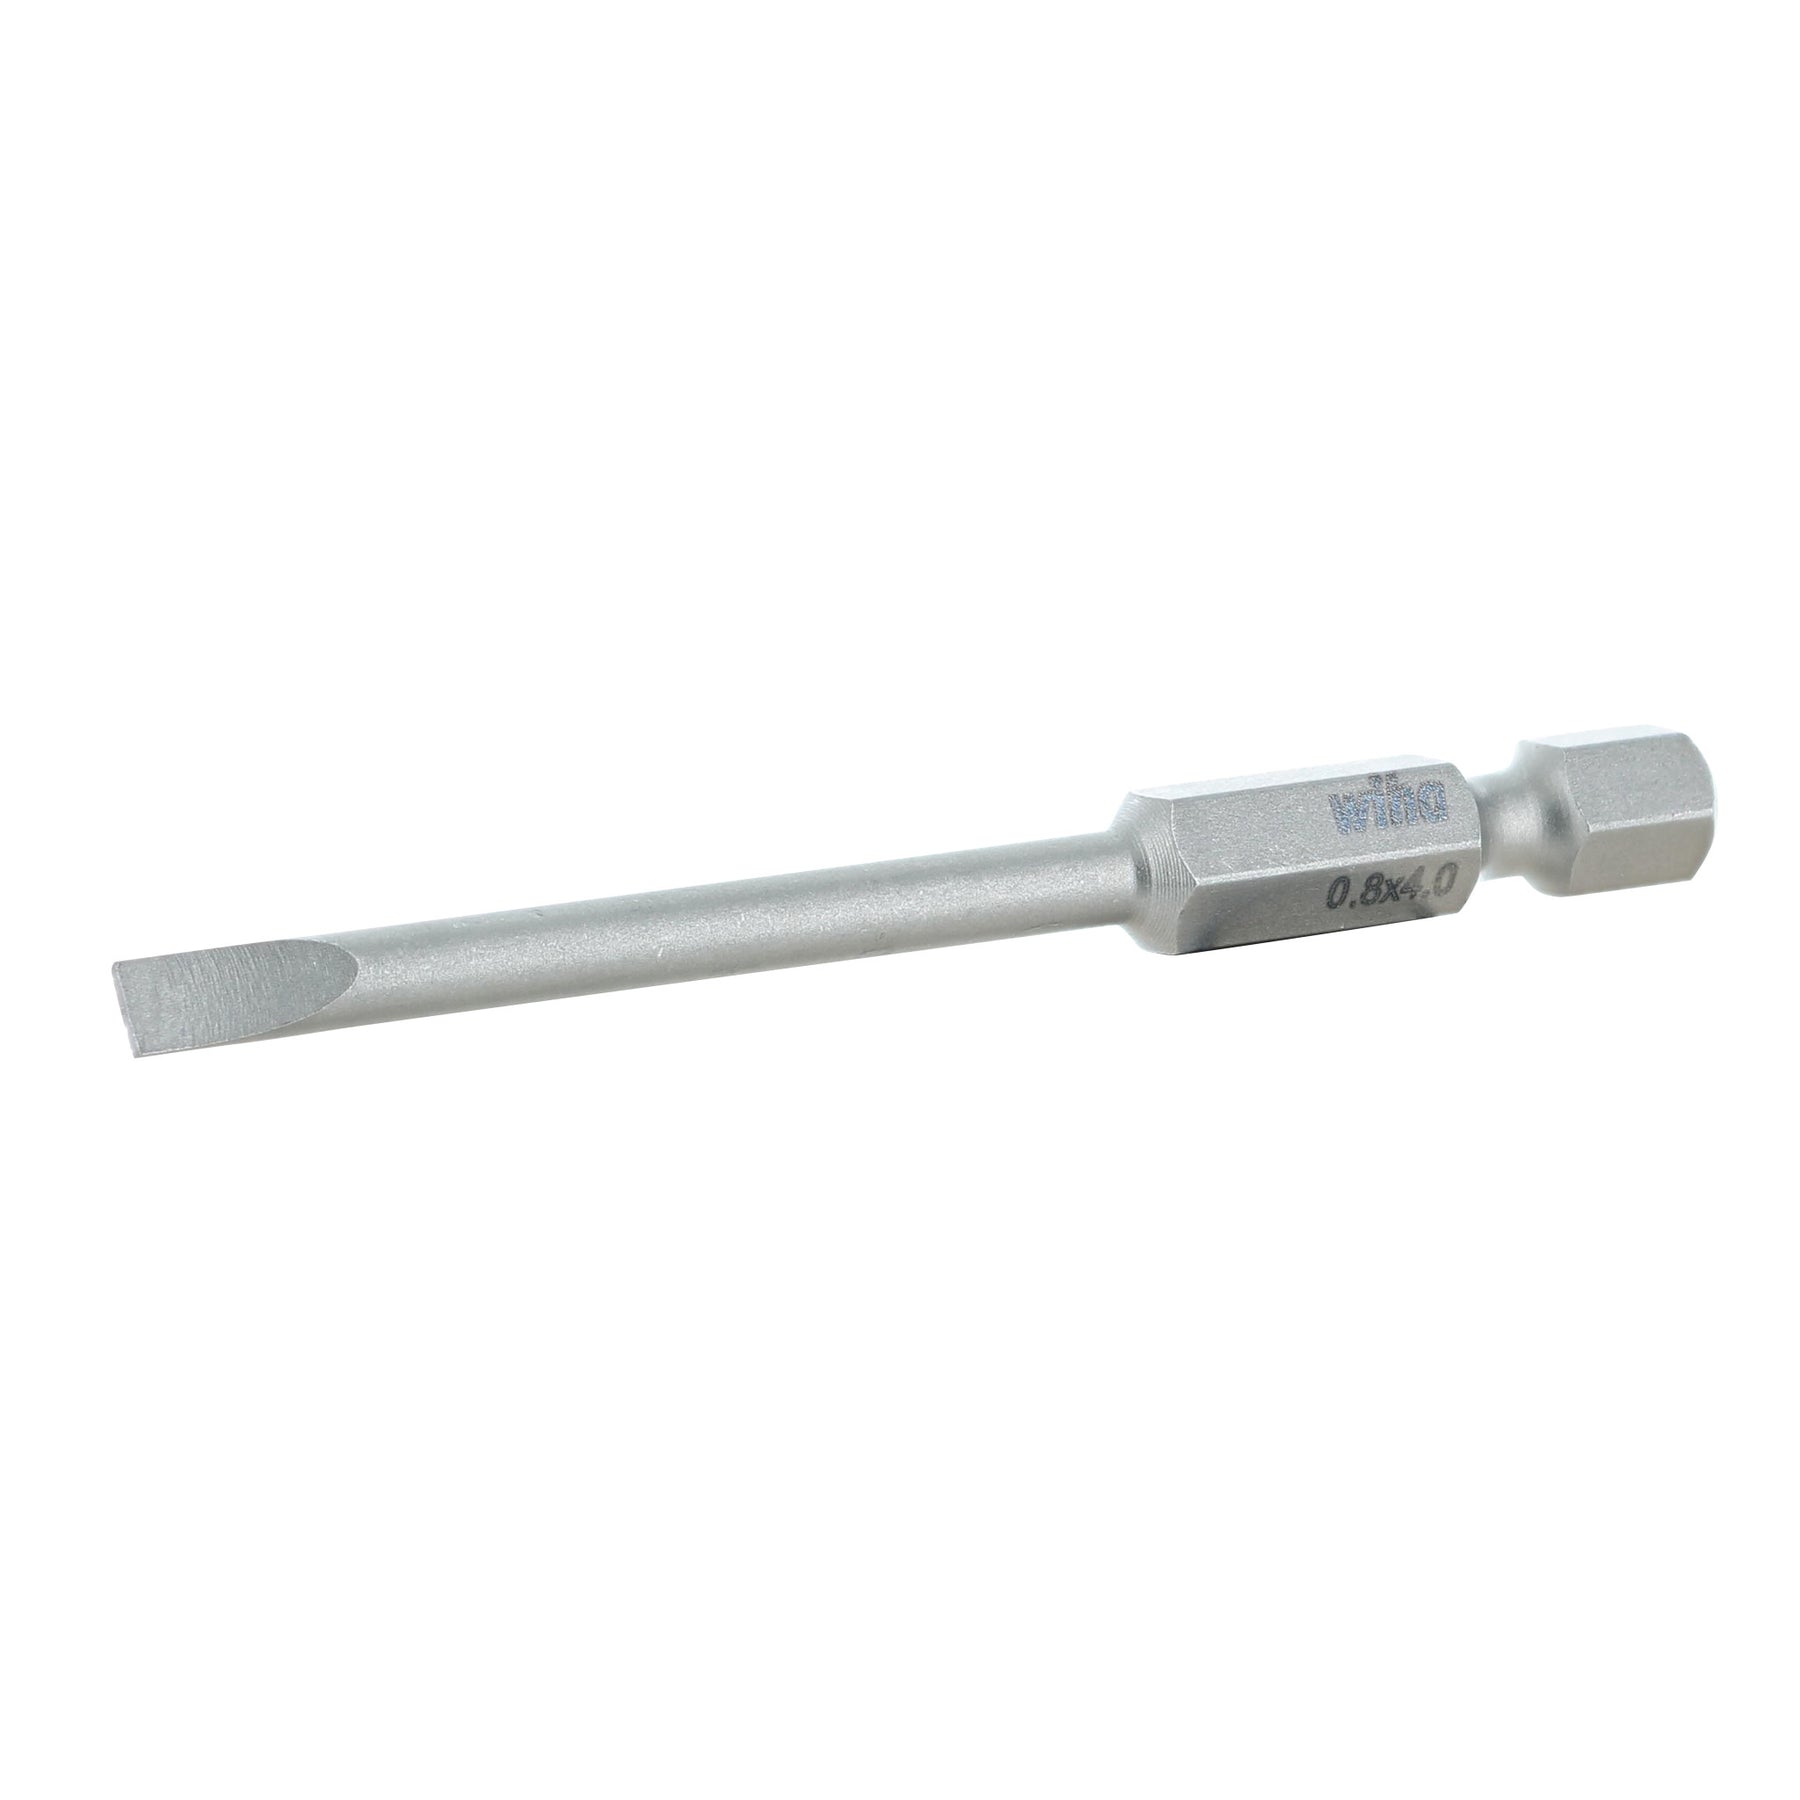 Slotted Bit 4.0 - 70mm - 10 Pack